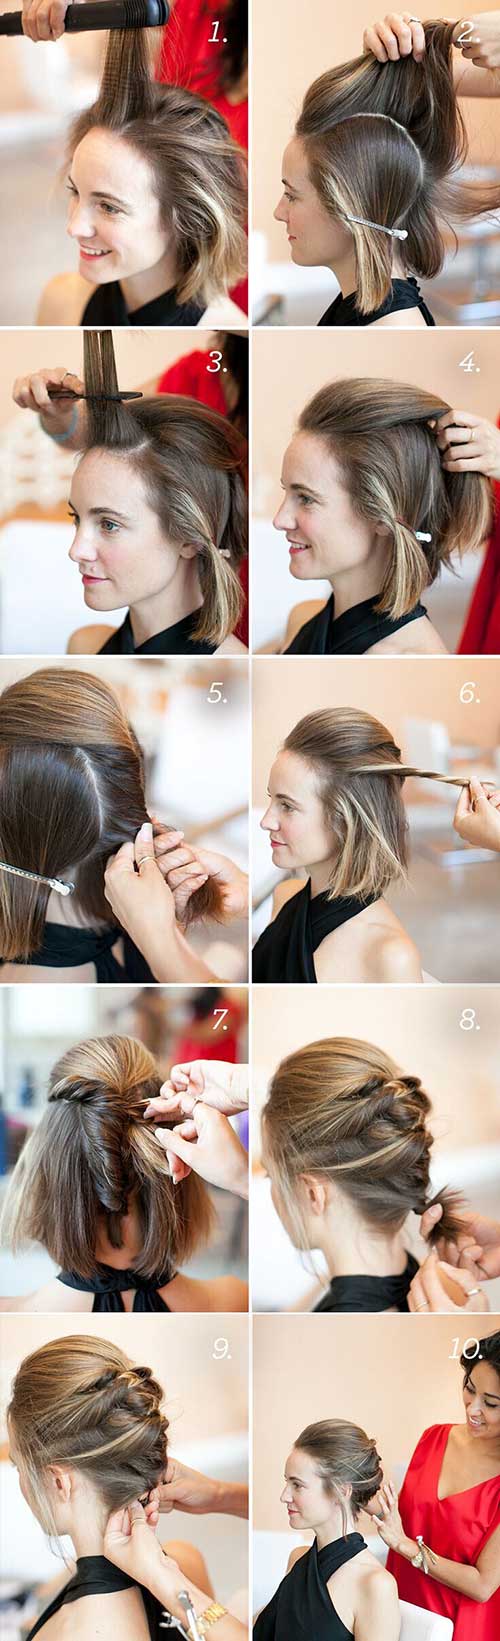 20 Incredible Diy Short Hairstyles For